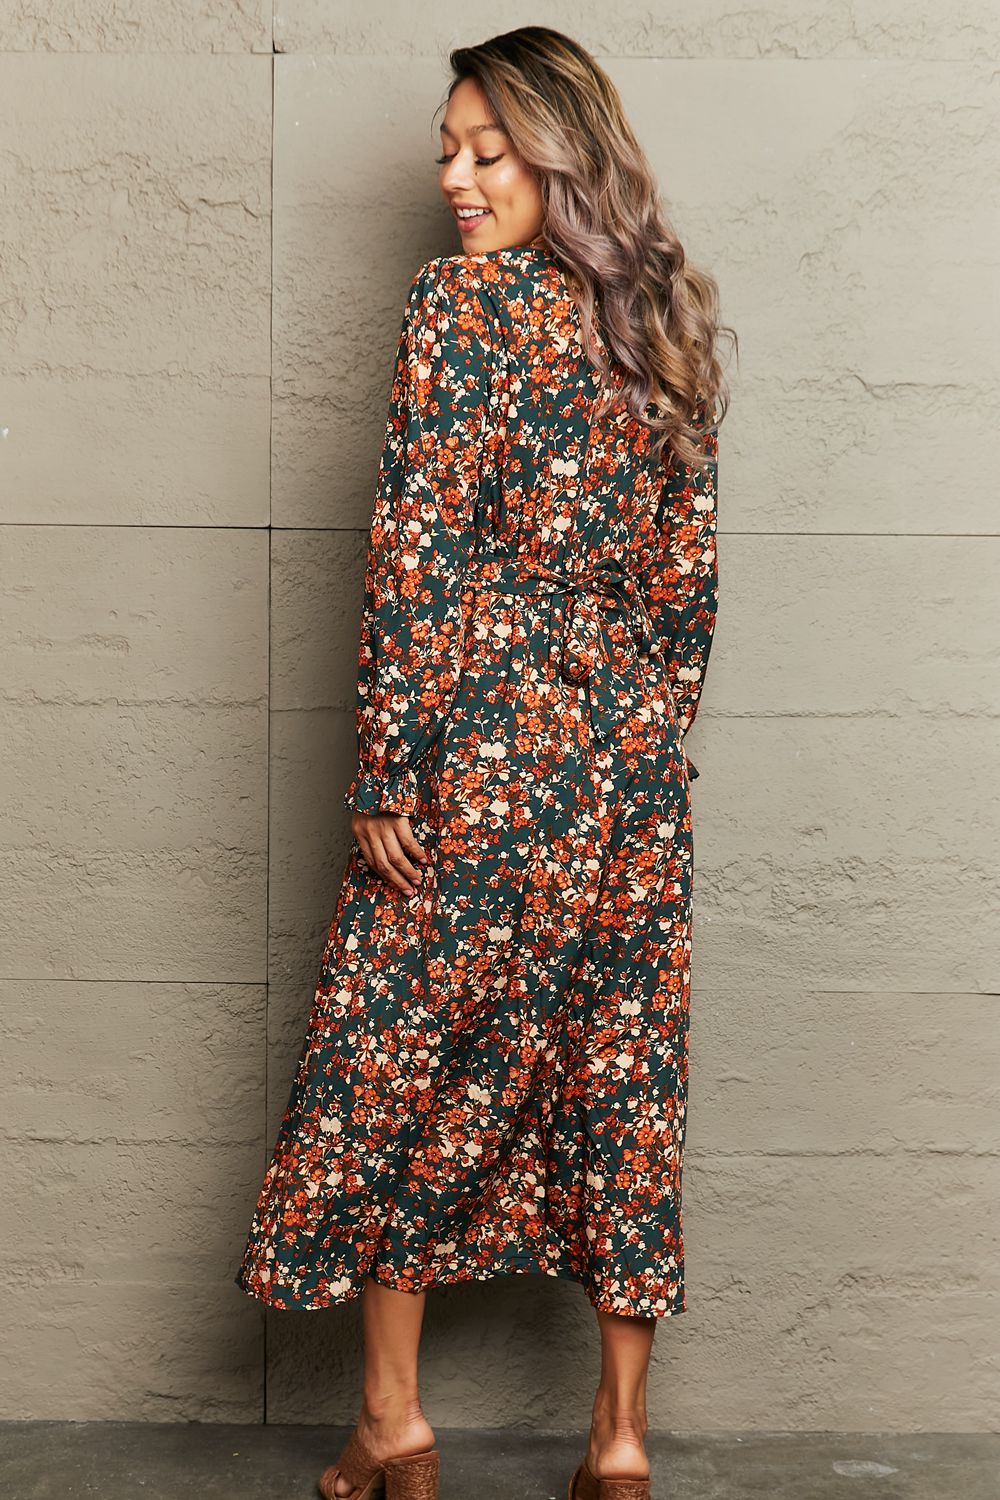 Gather Around Floral Midi Dress - Cheeky Chic Boutique